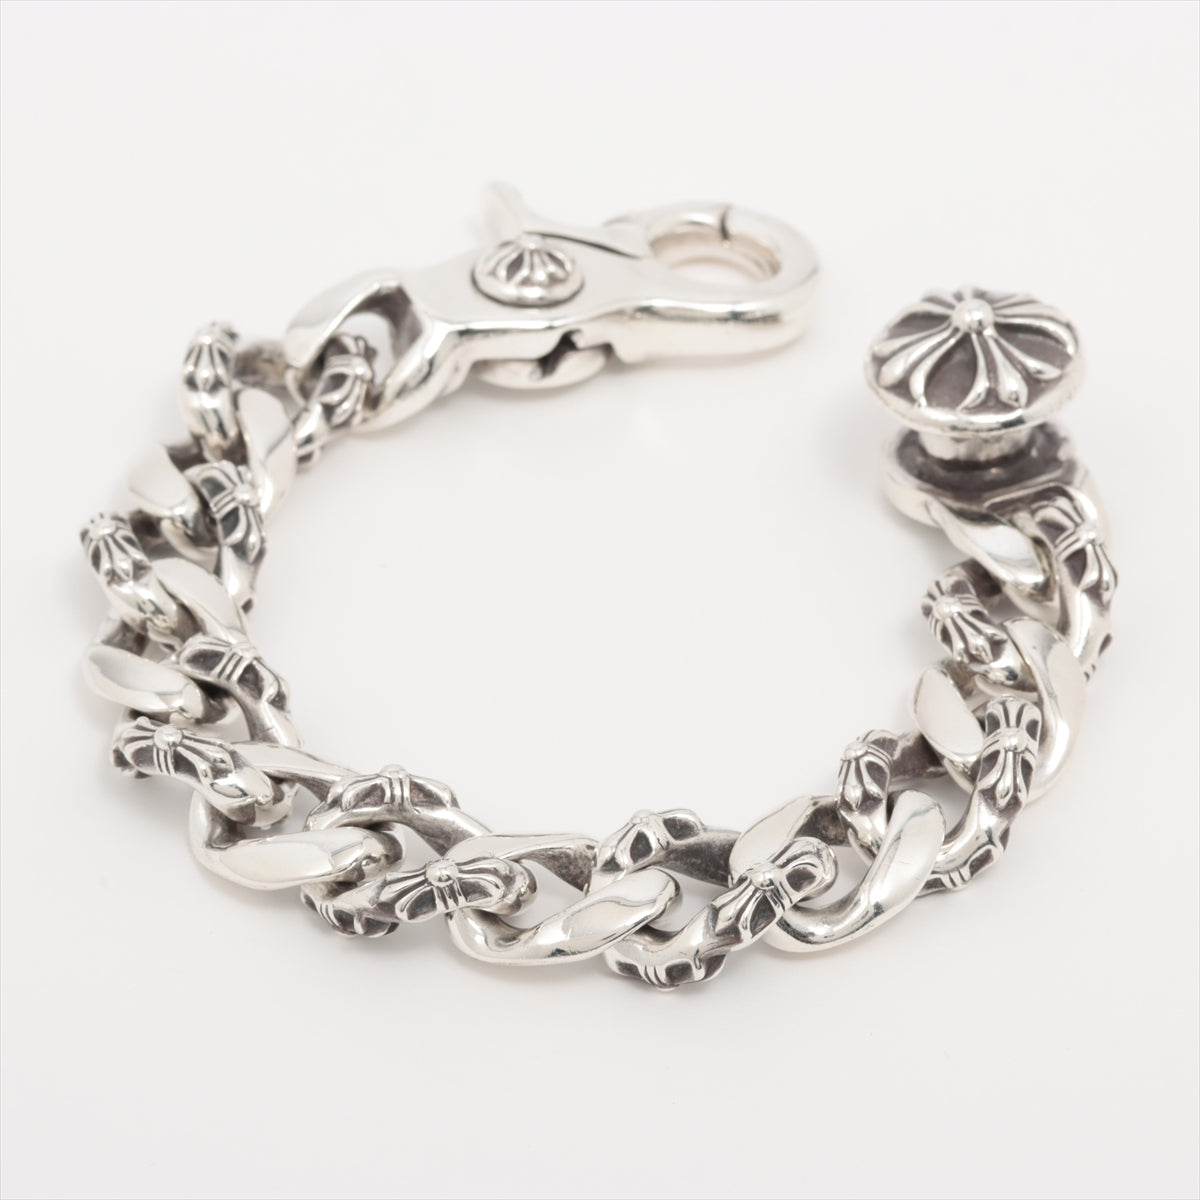 Chrome Hearts Cut Out Plus Hook Bracelet – opening act.